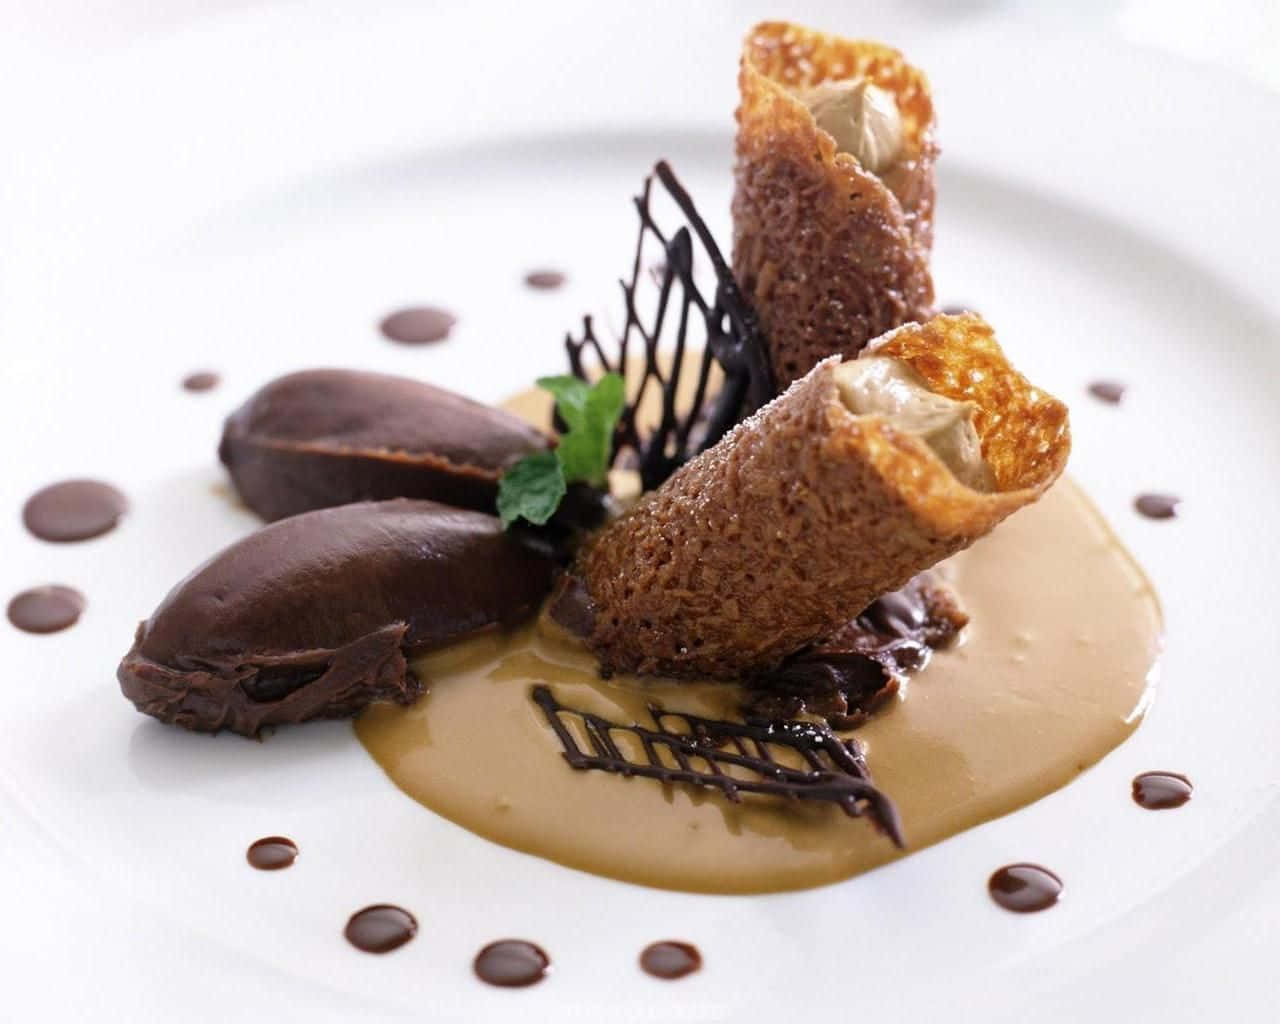 A Plate With Chocolate And Caramel Desserts